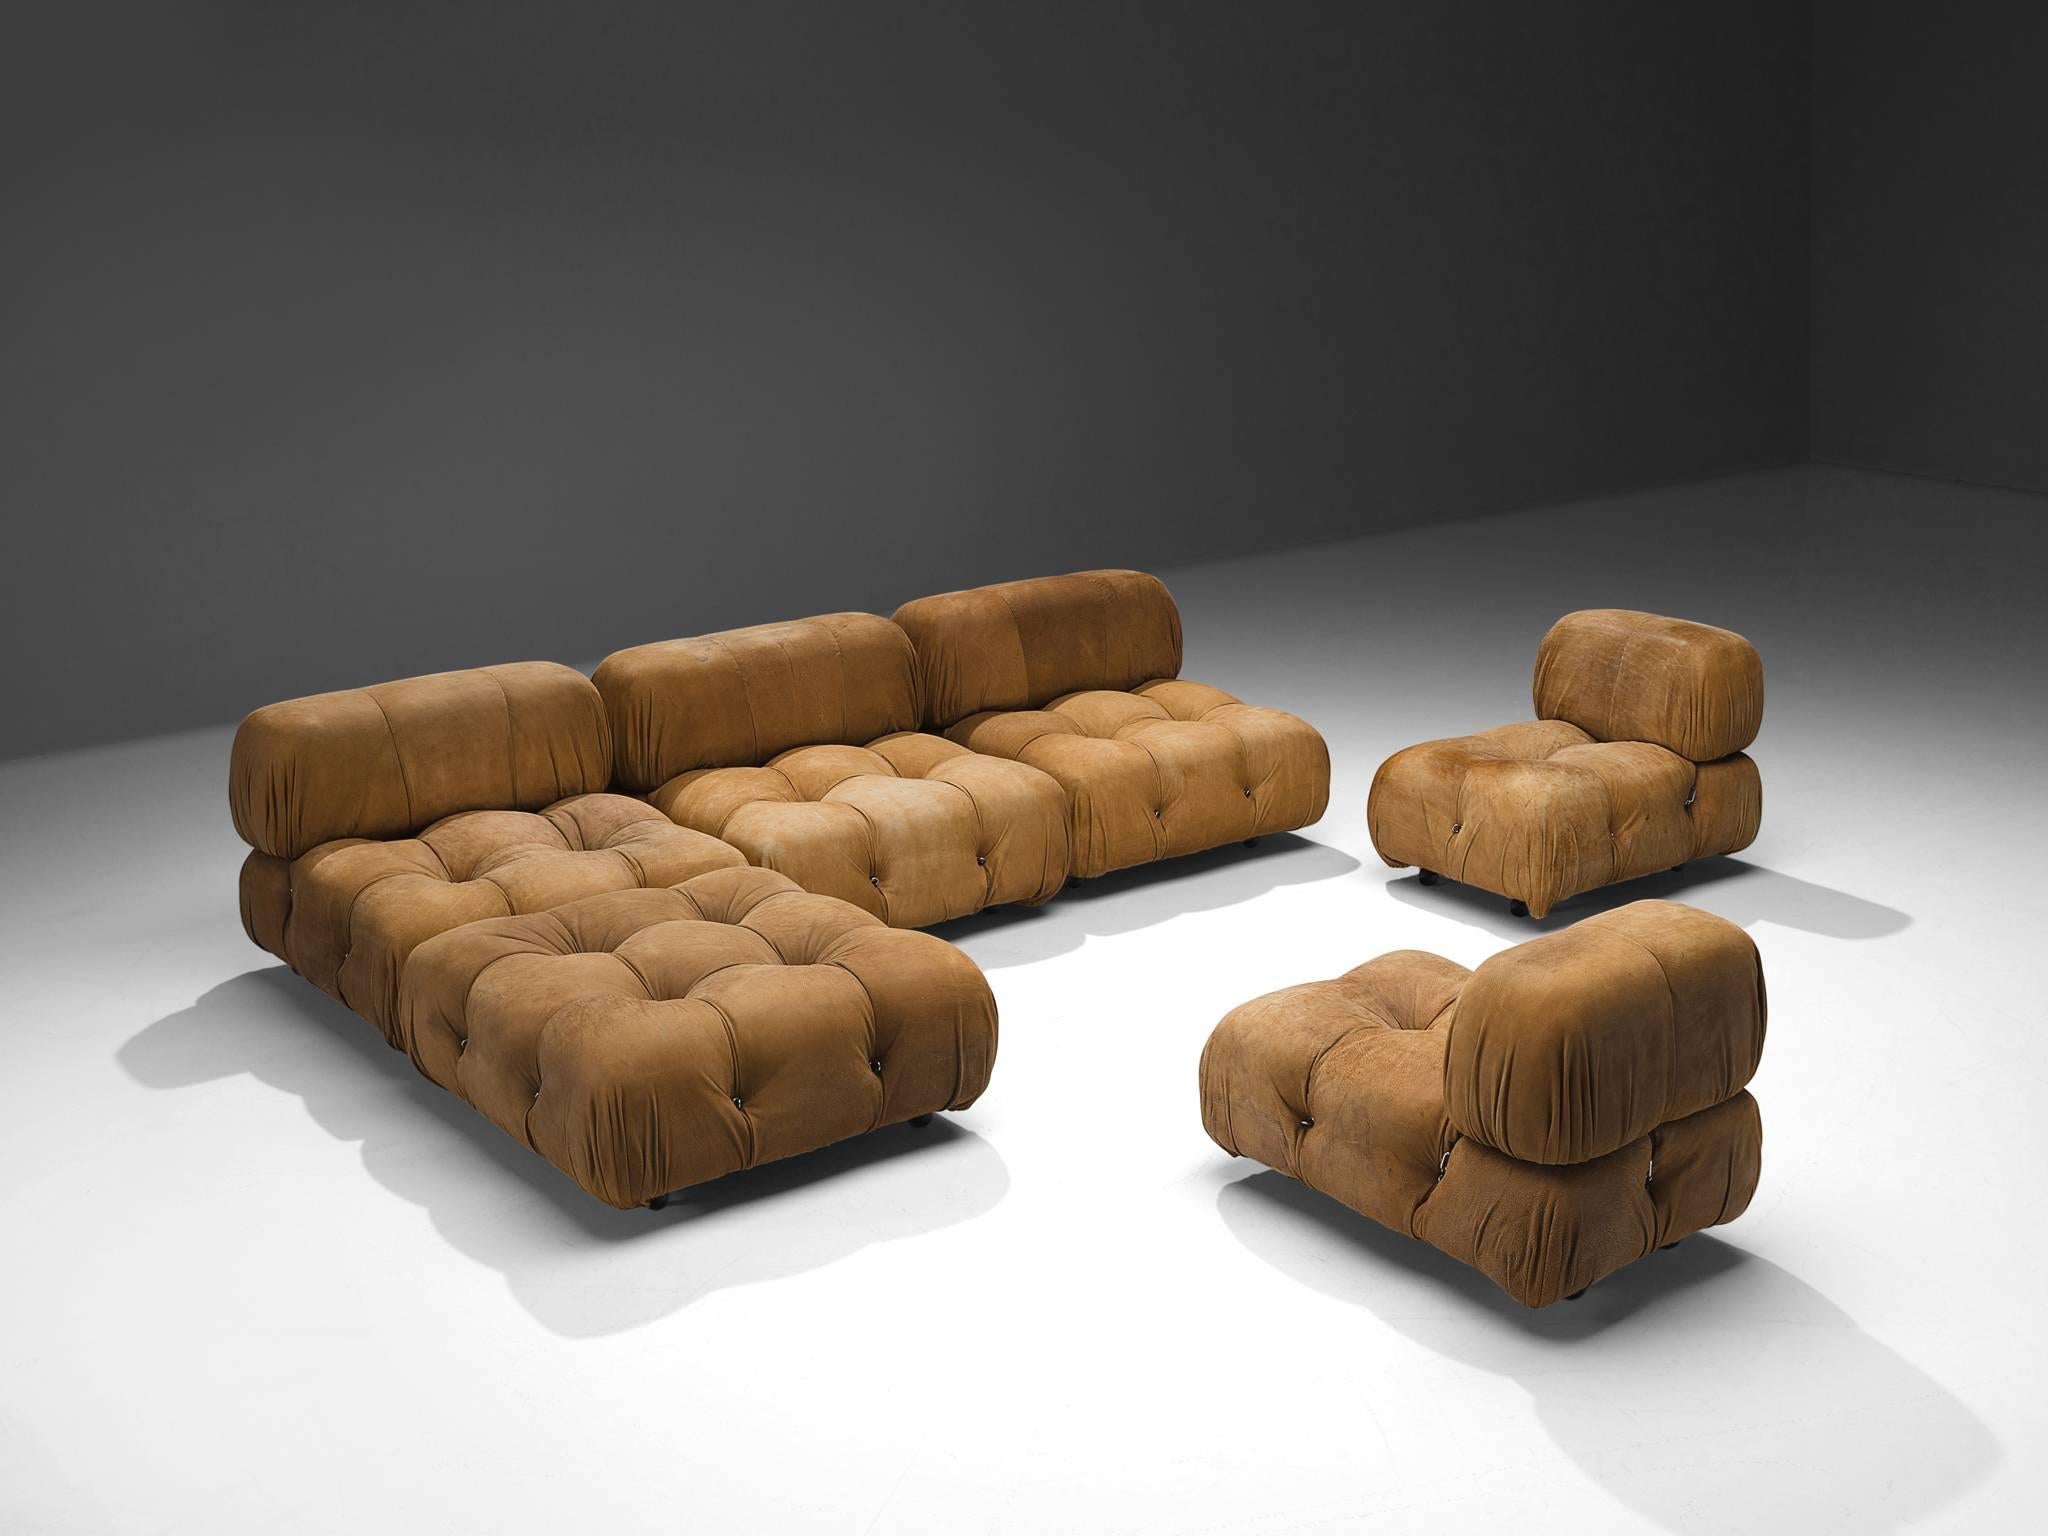 Mario Bellini, Camaleonda, cognac leather, Italy, 1962

The fact that this piece still has the original upholstery makes it a very special one. Besides that, the cognac leather shows a very strong and warm patina. The sectional elements of this can